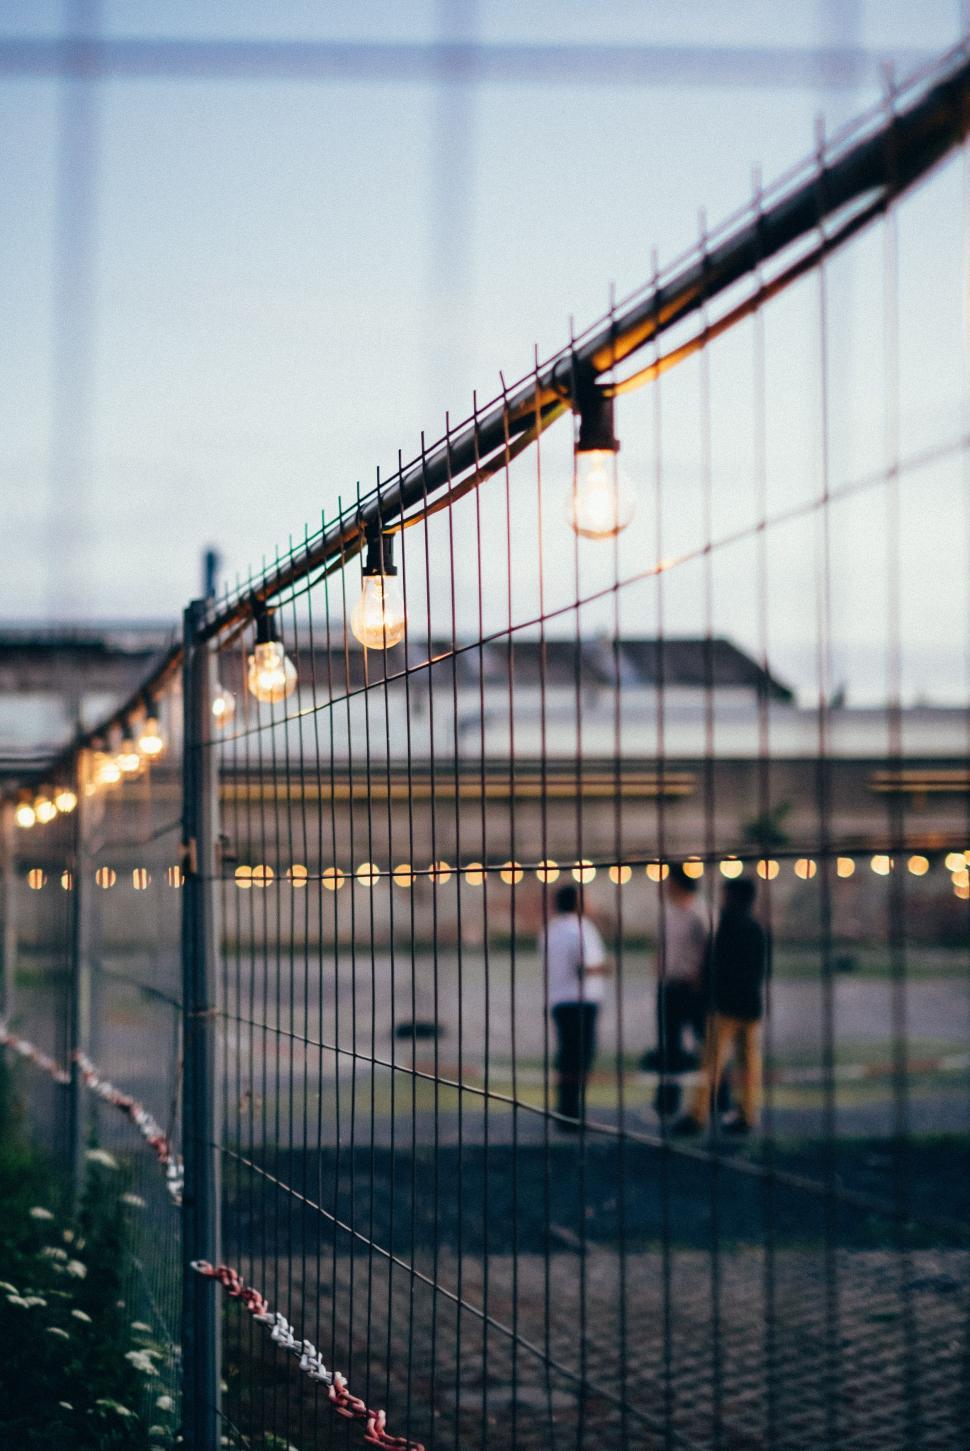 Free Image of Couple Standing Next to Fence 